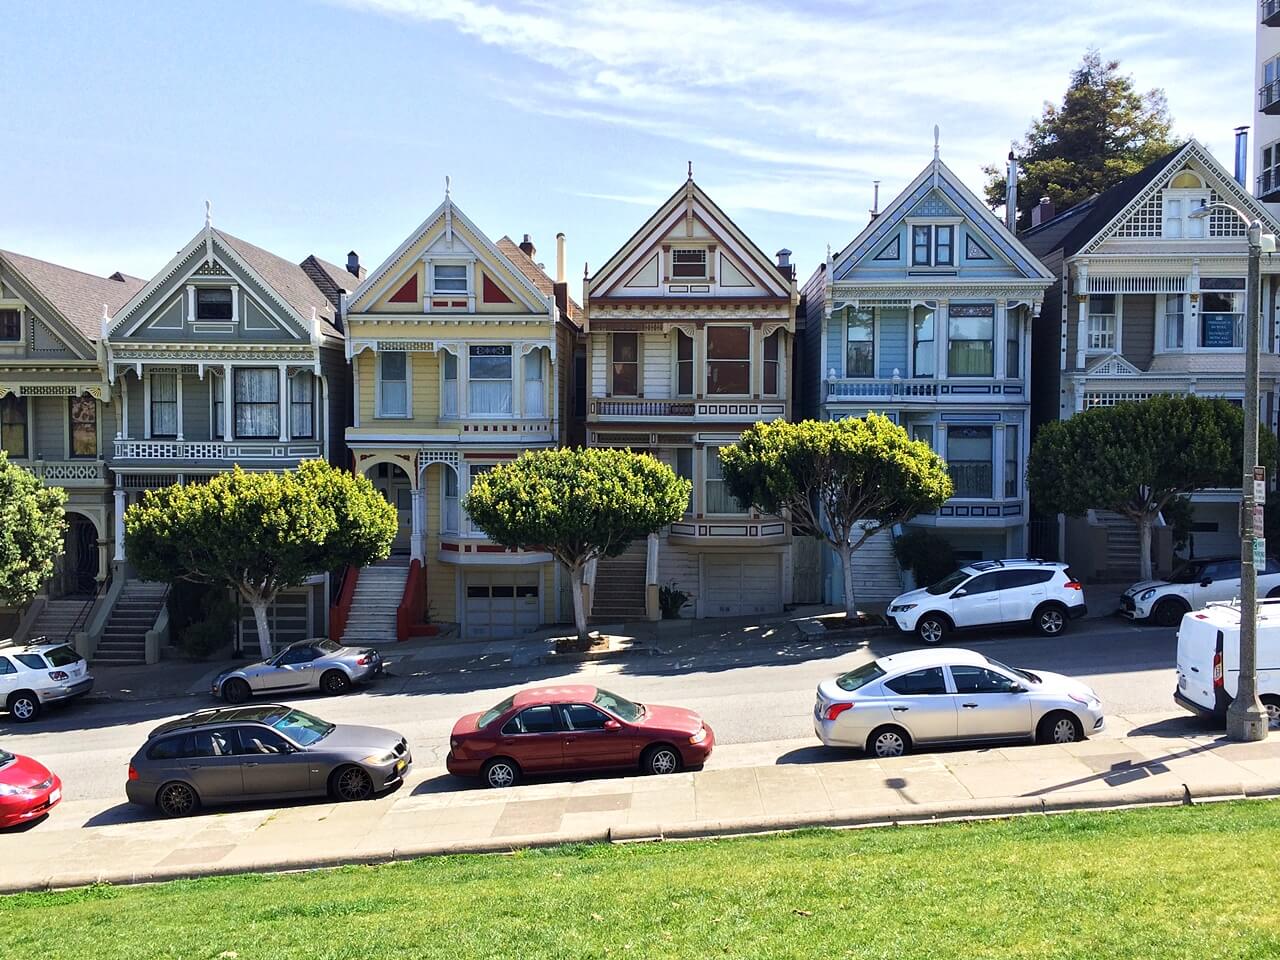 You are currently viewing San Francisco’s Painted Ladies: The Historic Houses of Alamo Square